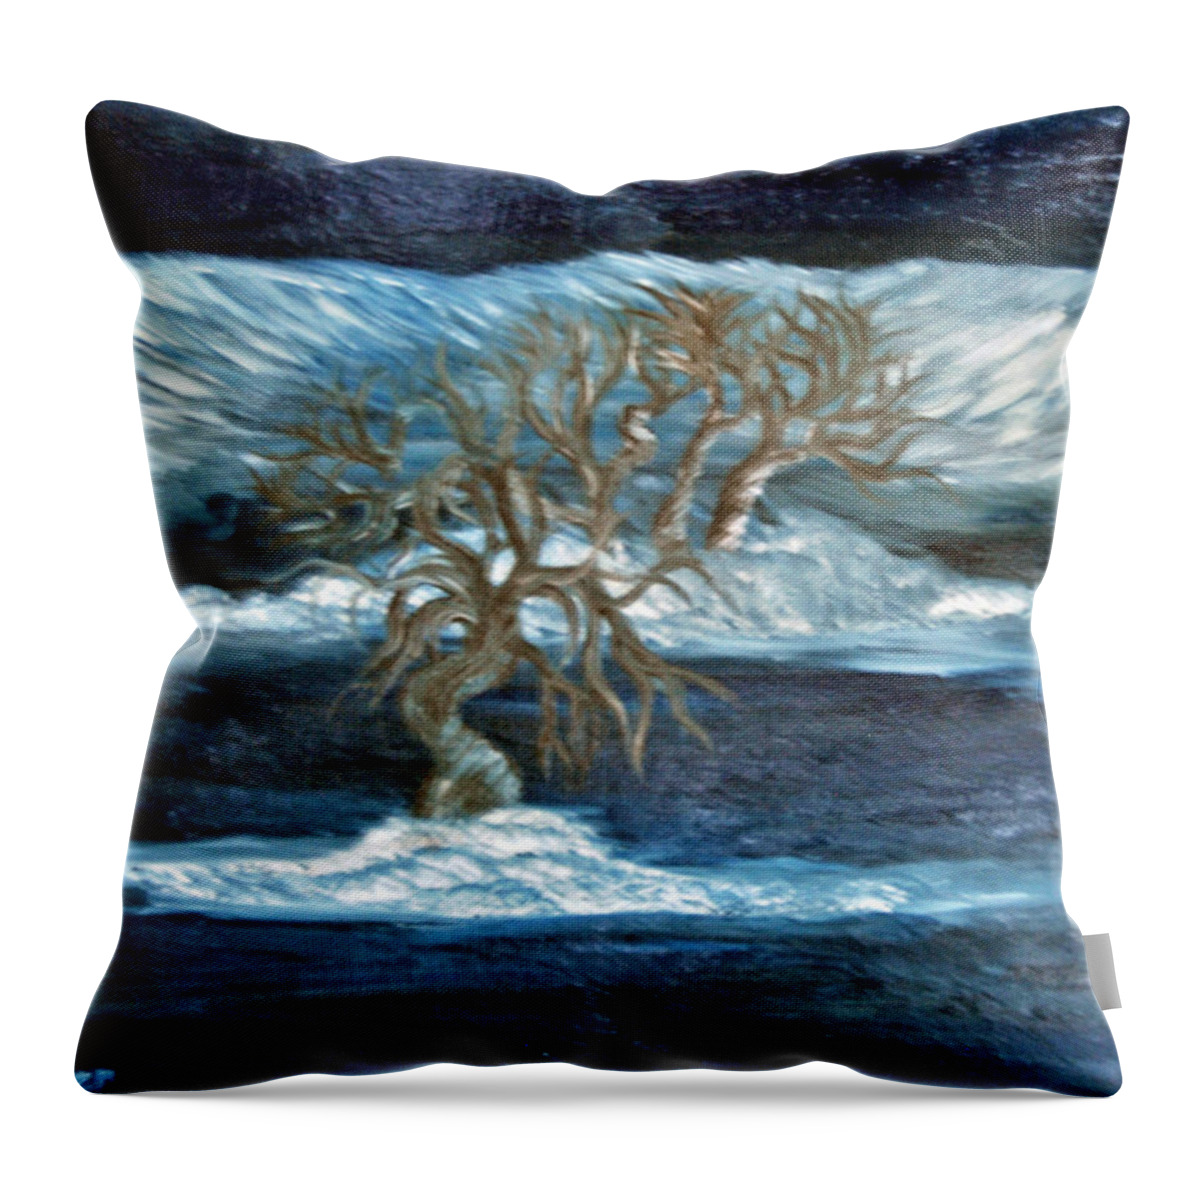  Throw Pillow featuring the painting Midnight Above Three Trees by Suzanne Surber